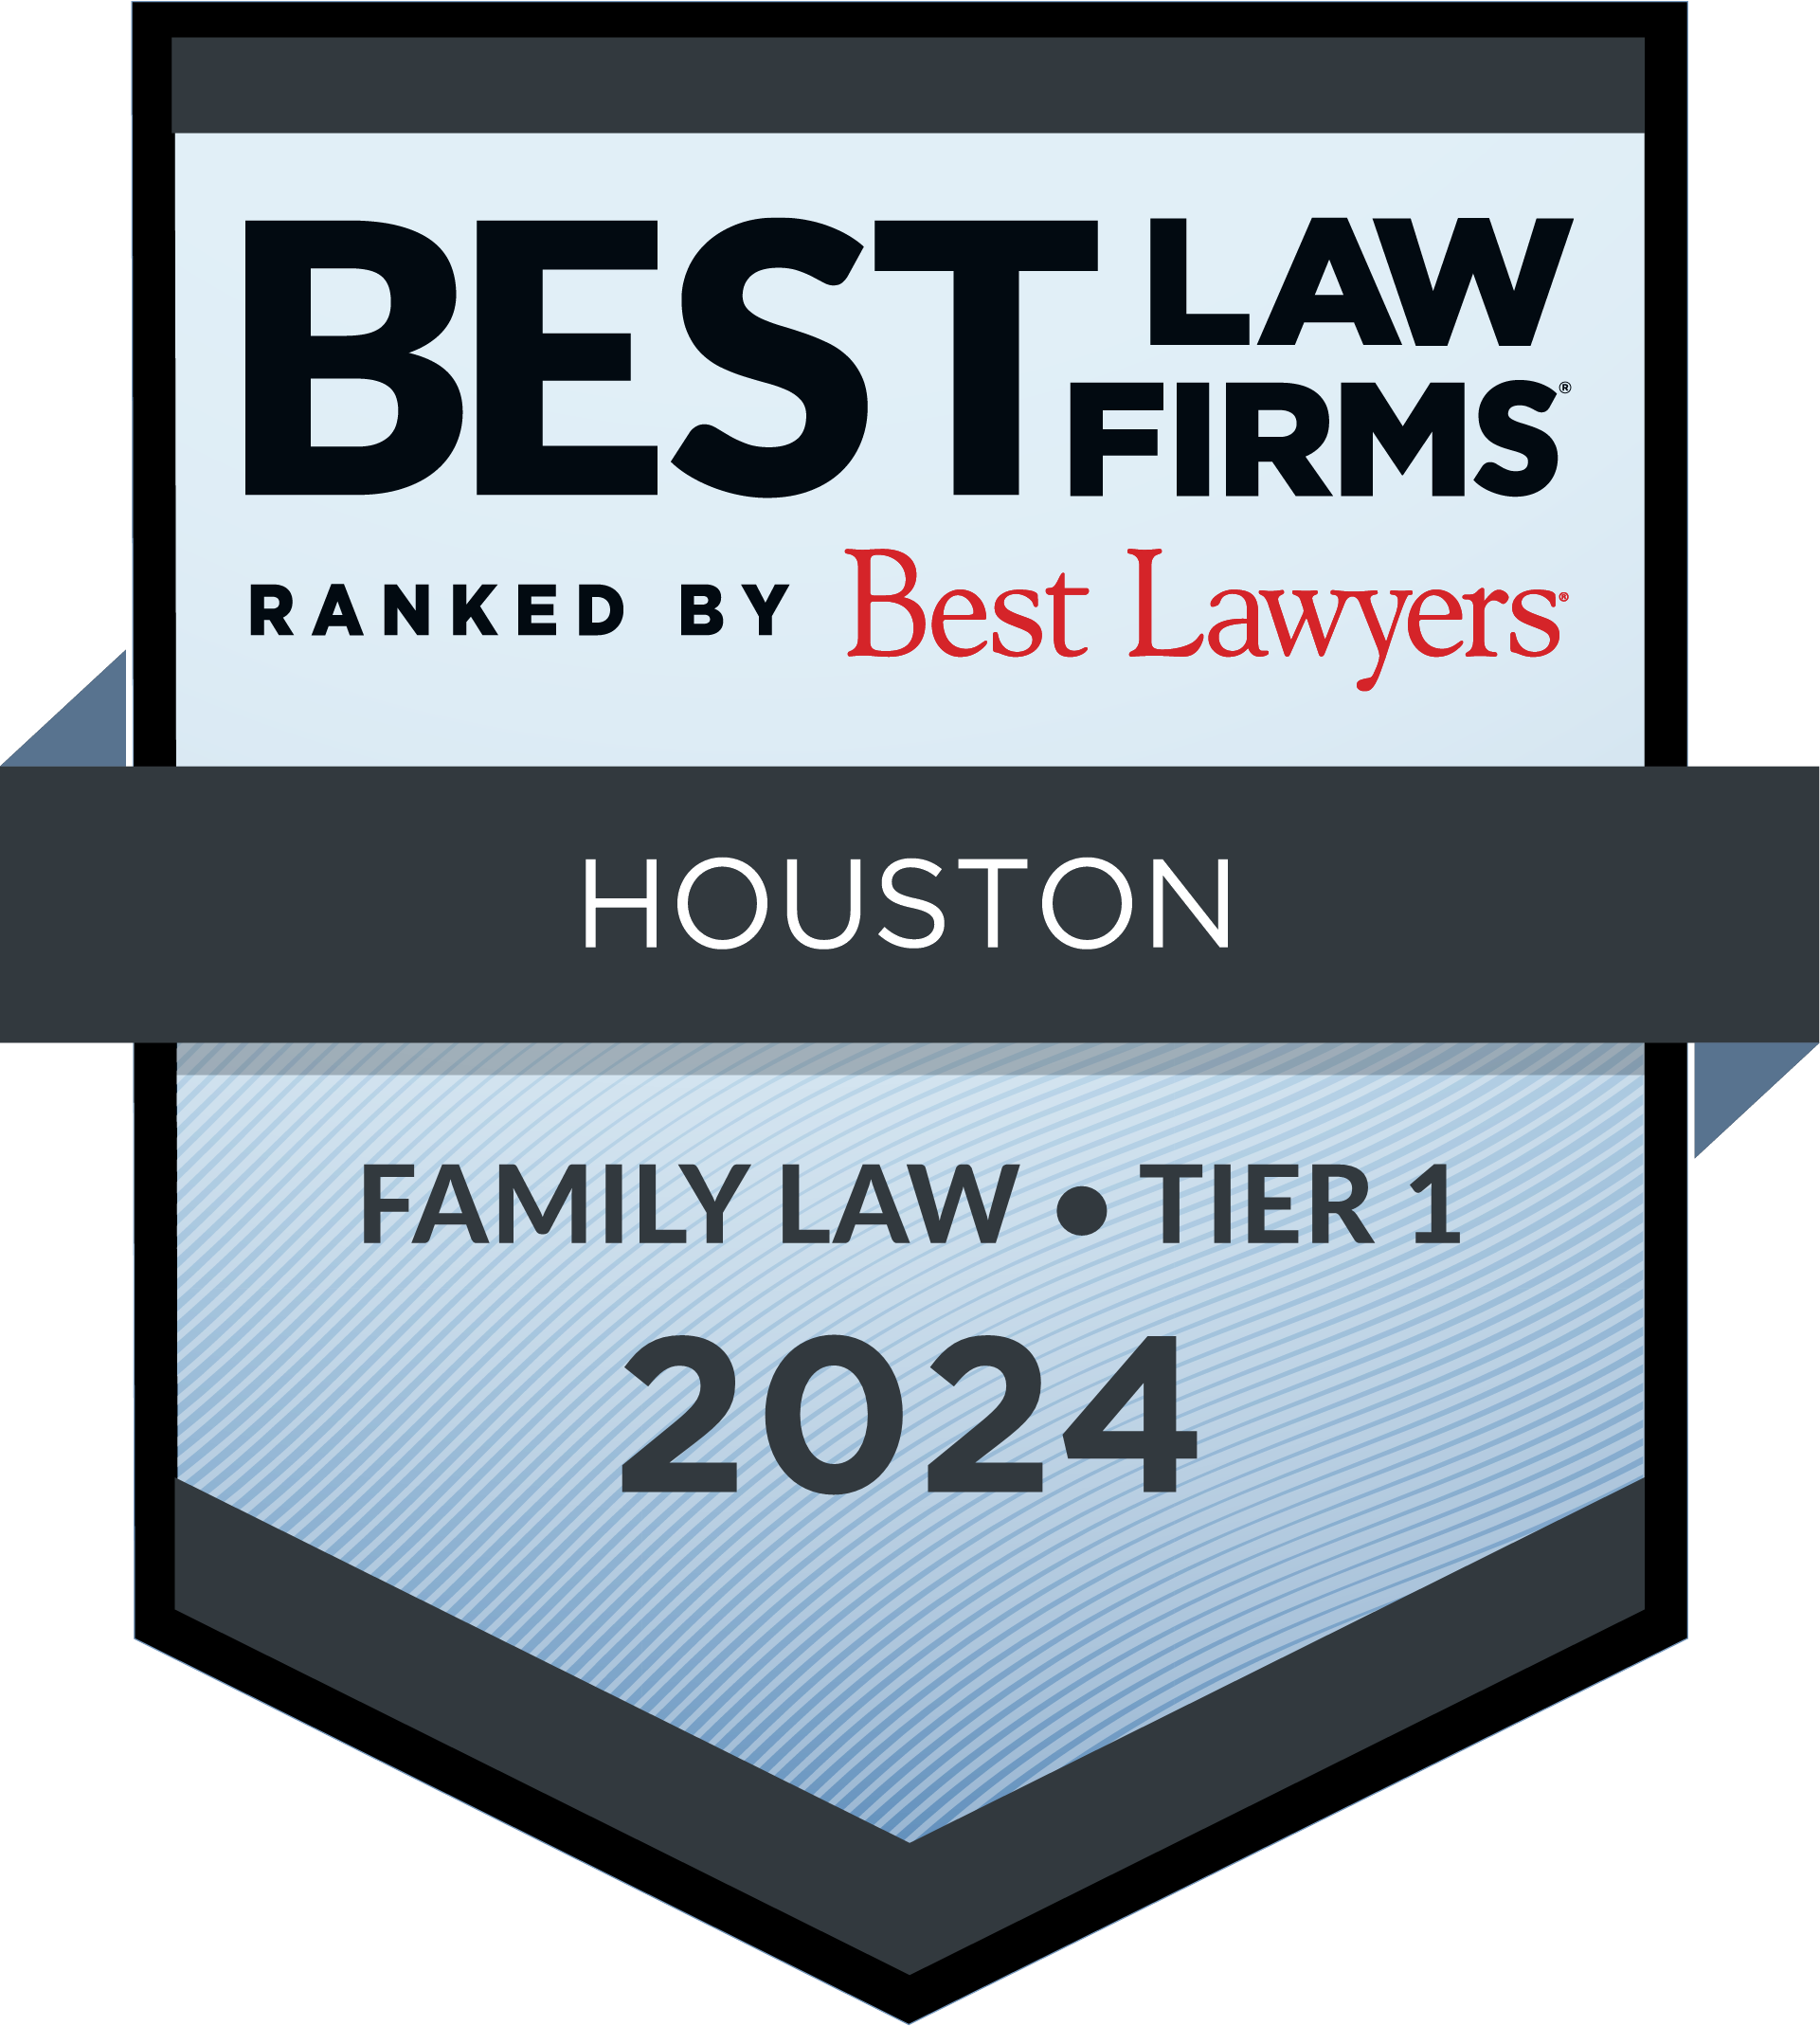 Best Law Firms Ranked By Best Lawyer Houston Family Law Tier 1 2024